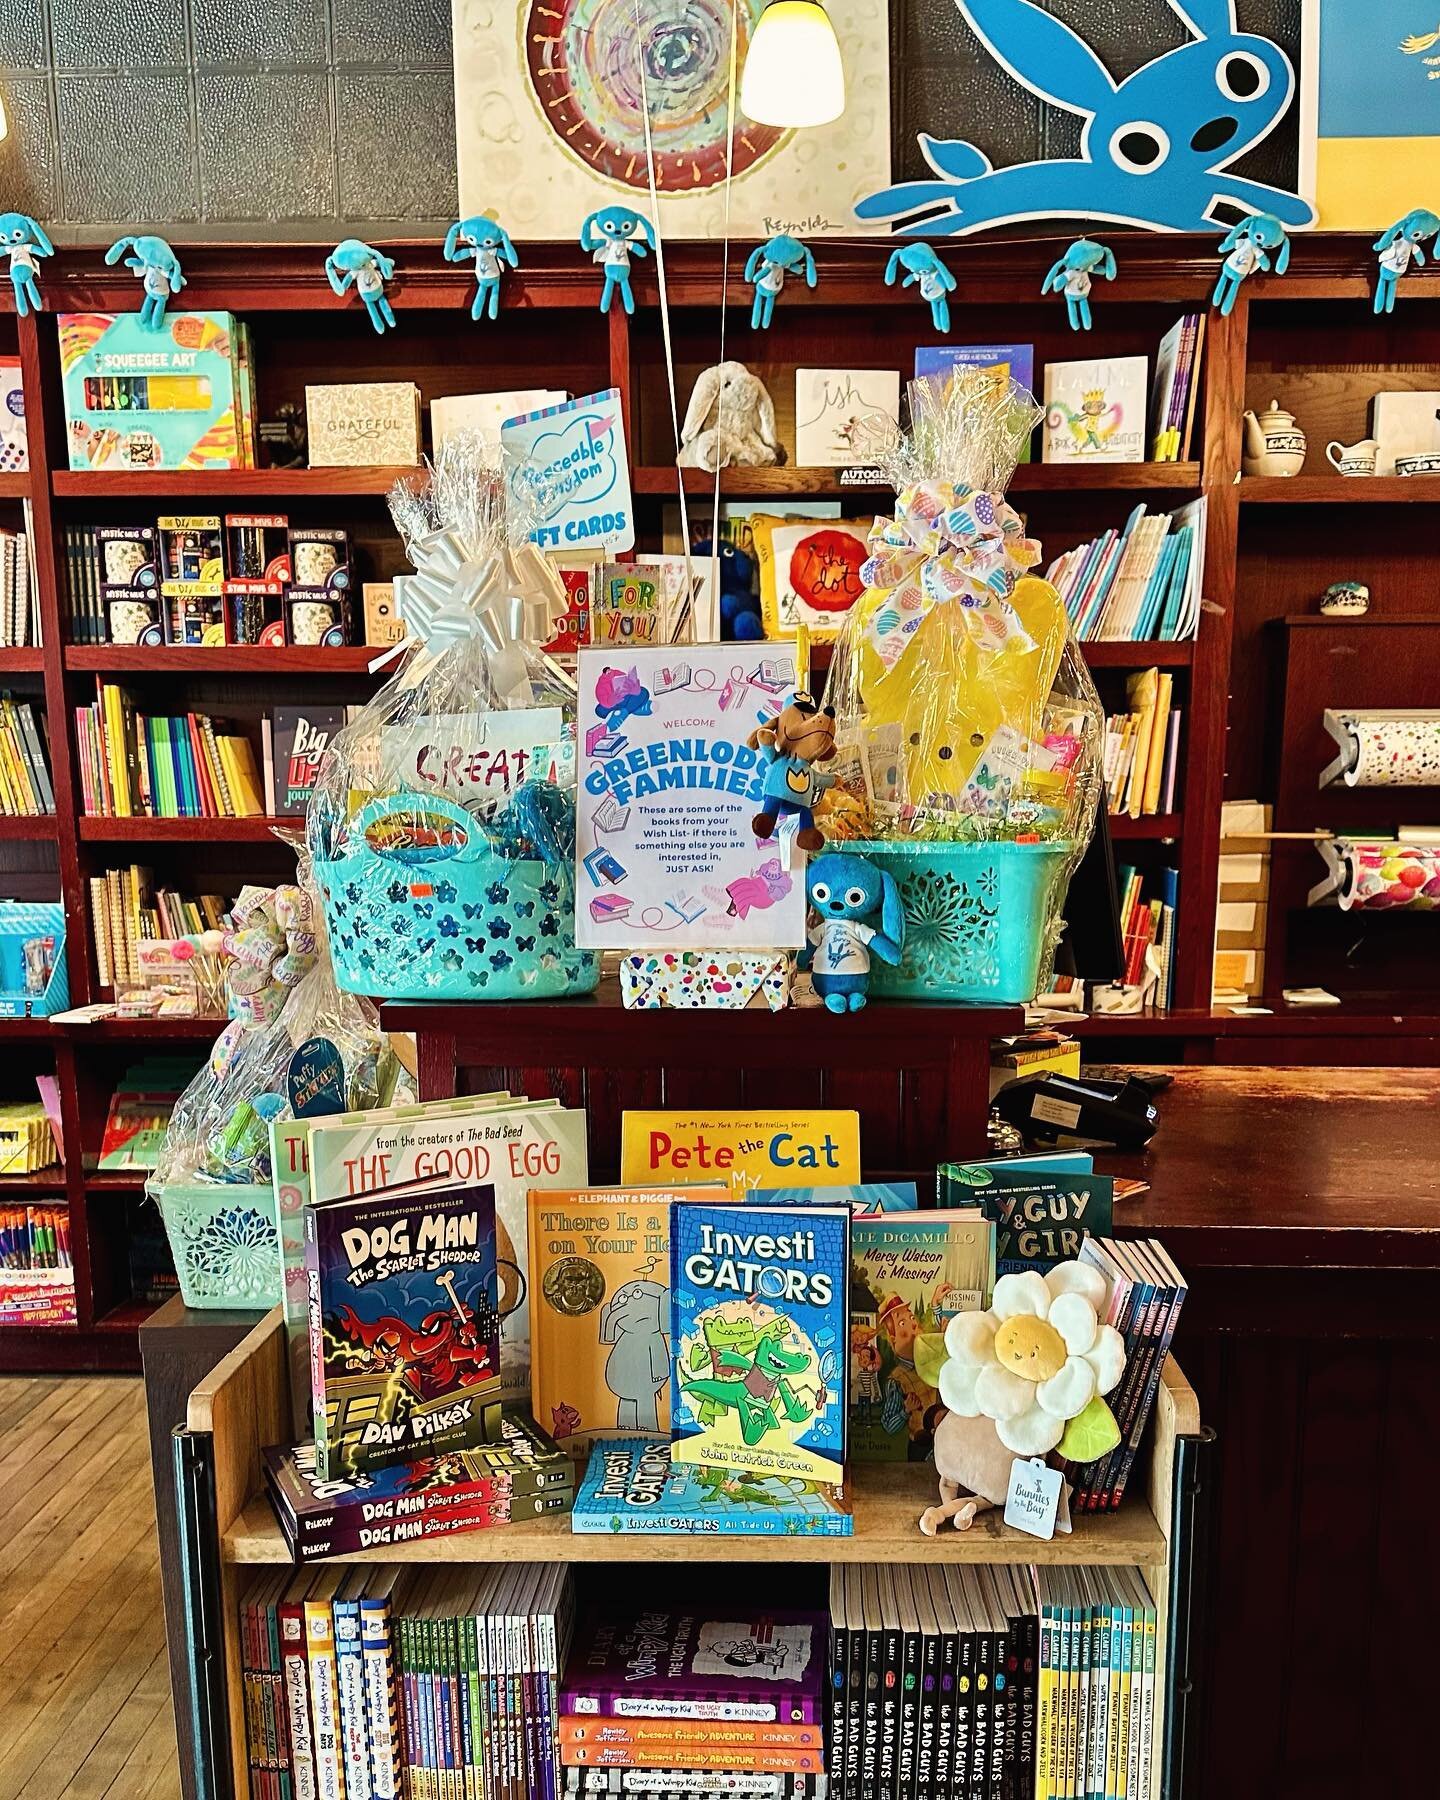 We&rsquo;re excited to host a &ldquo;Read Out&rdquo; for Greenlodge School families this afternoon (3/21) from 4-6 pm! Stop by our shop to do a little reading and add to your Readathon minutes! 

Our booksellers, including Laurie Higgins, a reading s